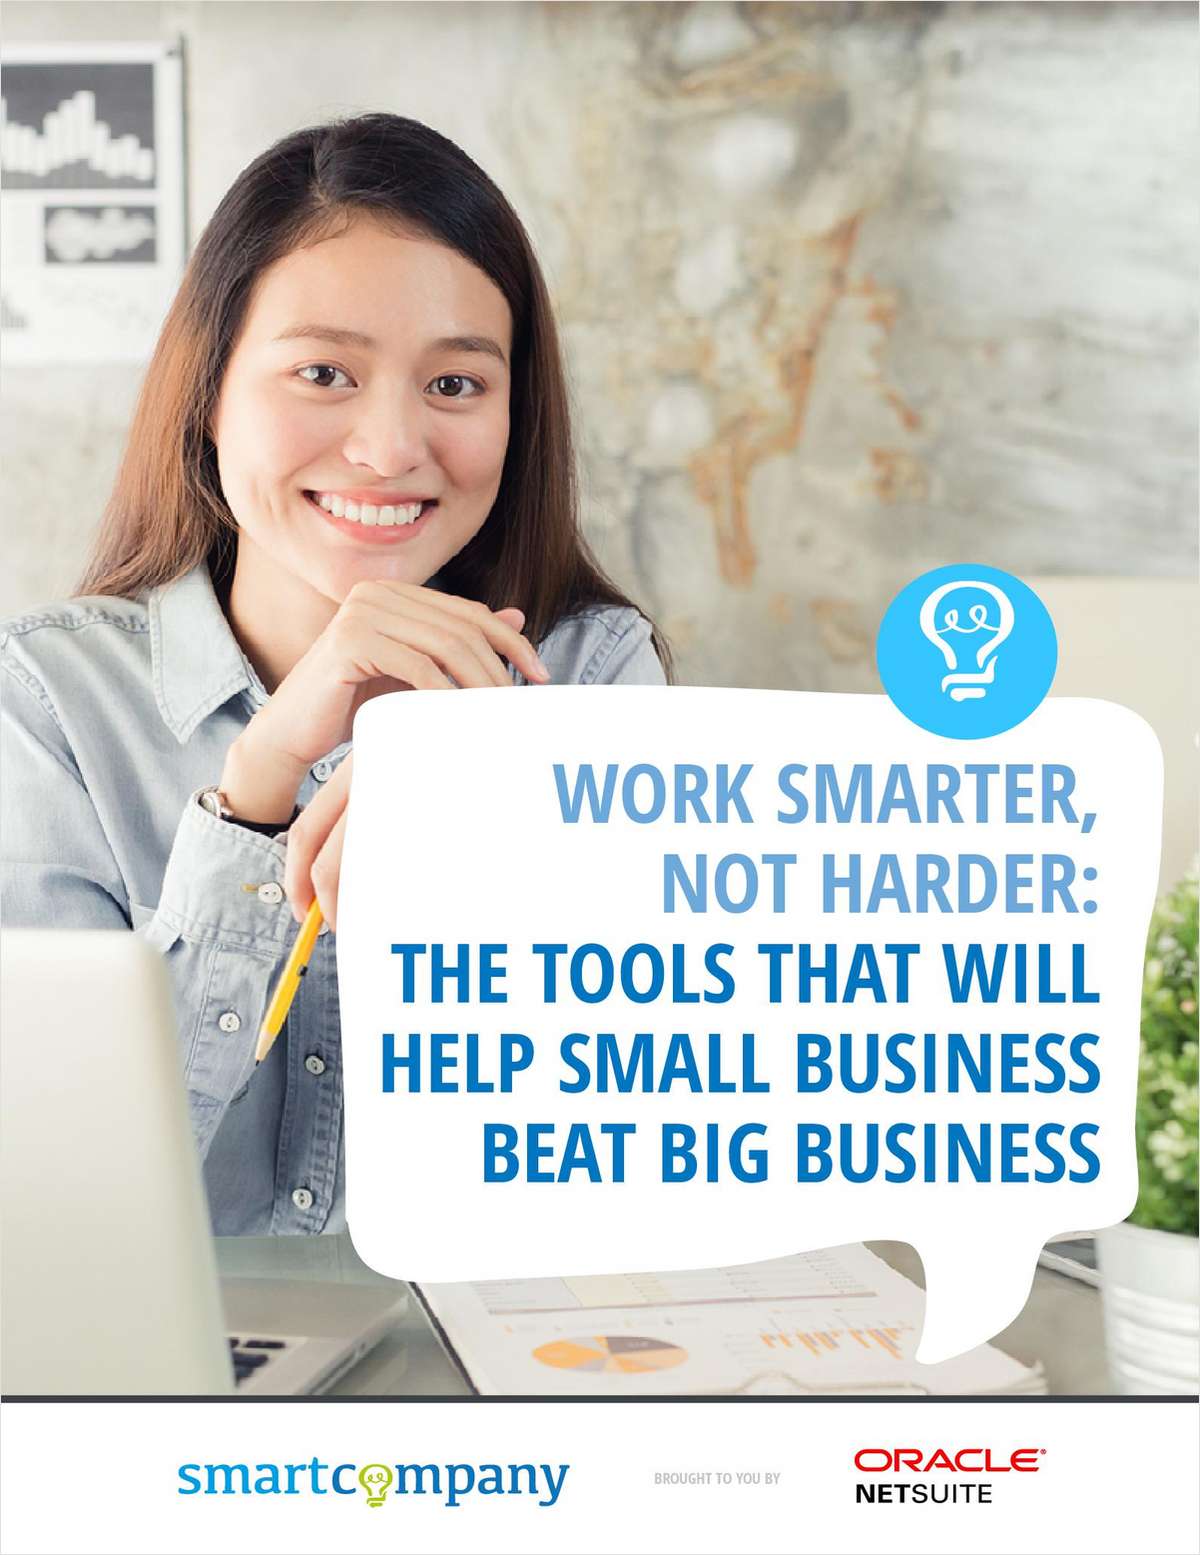 The Tools That Will Help Small Business Beat Big Business